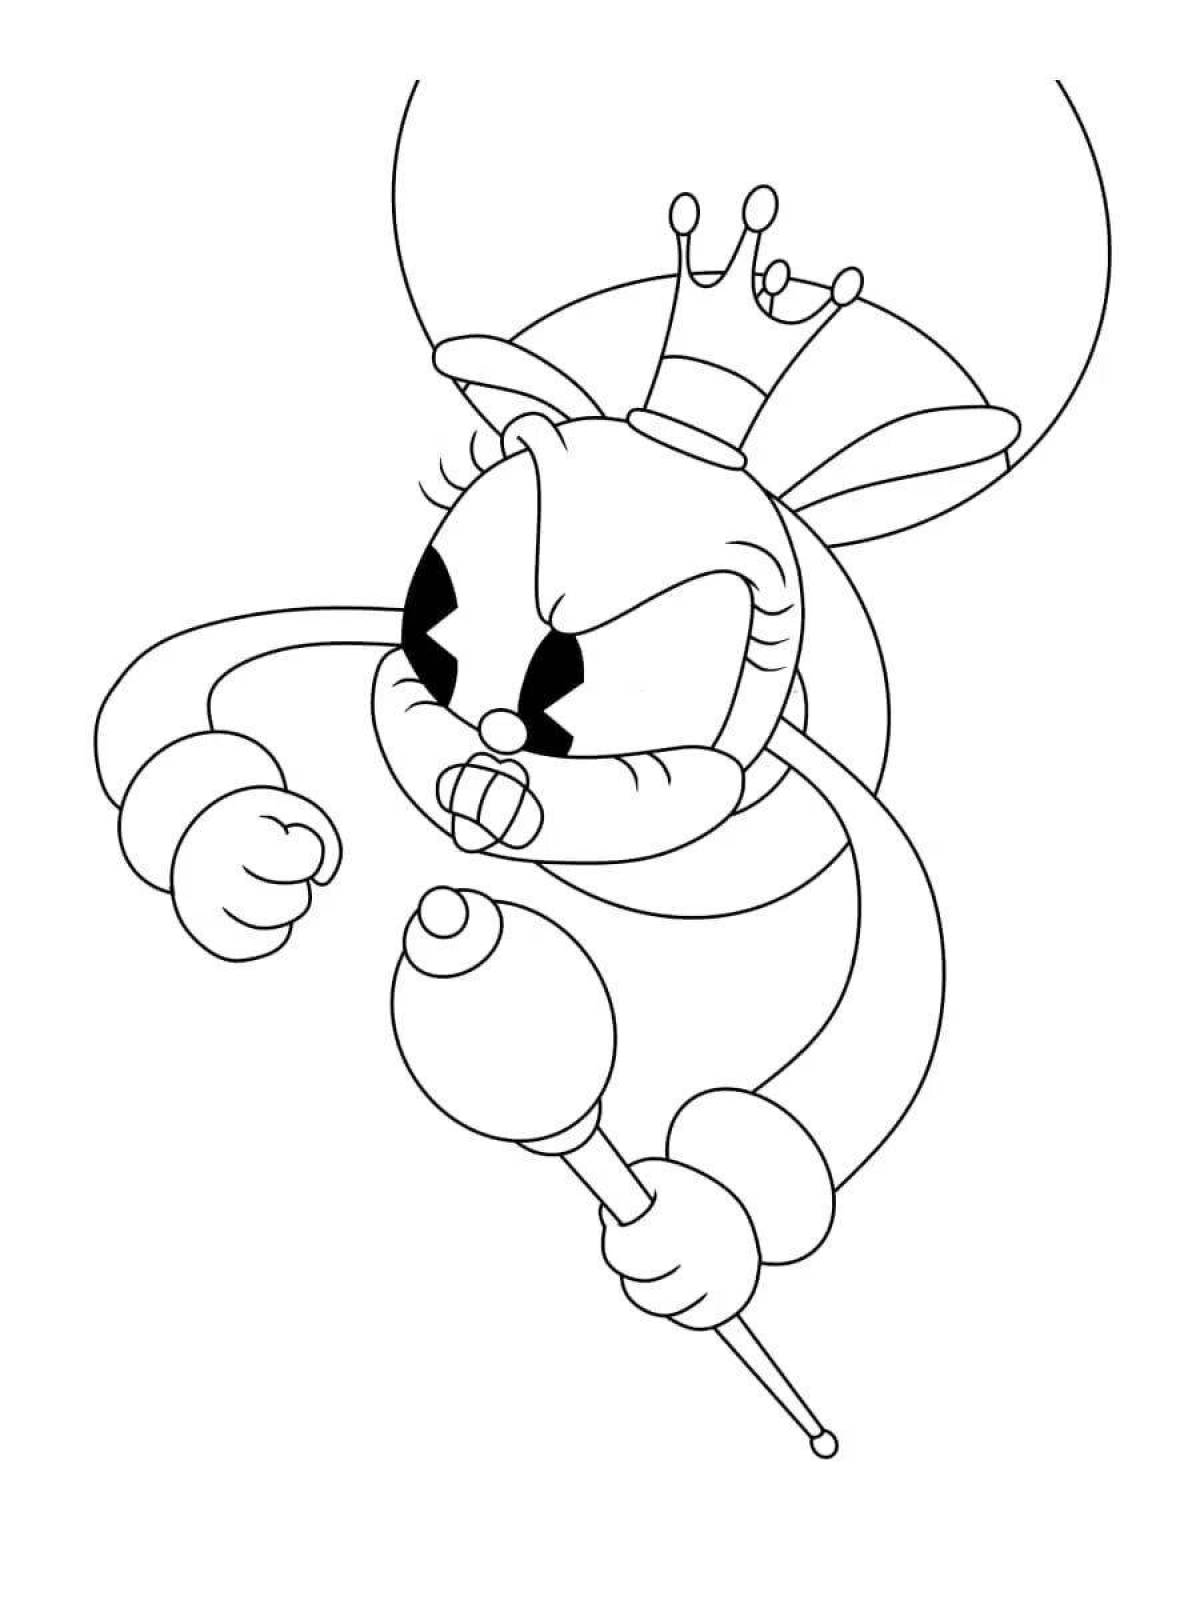 Funny cuphead coloring book